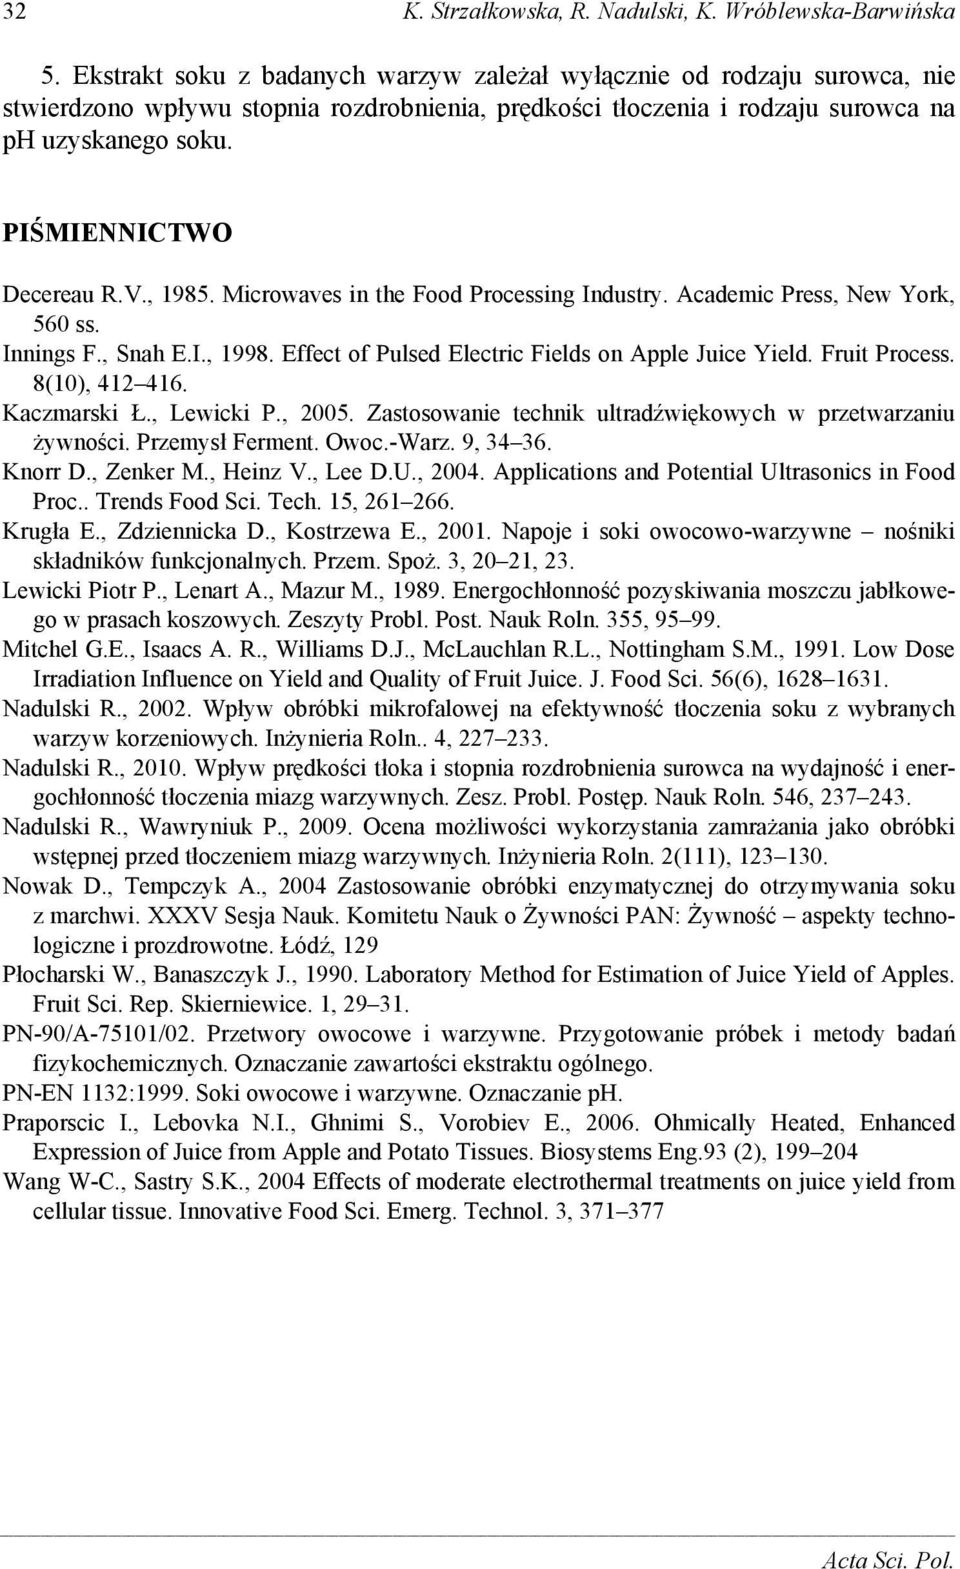 PIŚMIENNICTWO Decereau R.V., 1985. Microwaves in the Food Processing Industry. Academic Press, New York, 560 ss. Innings F., Snah E.I., 1998. Effect of Pulsed Electric Fields on Apple Juice Yield.